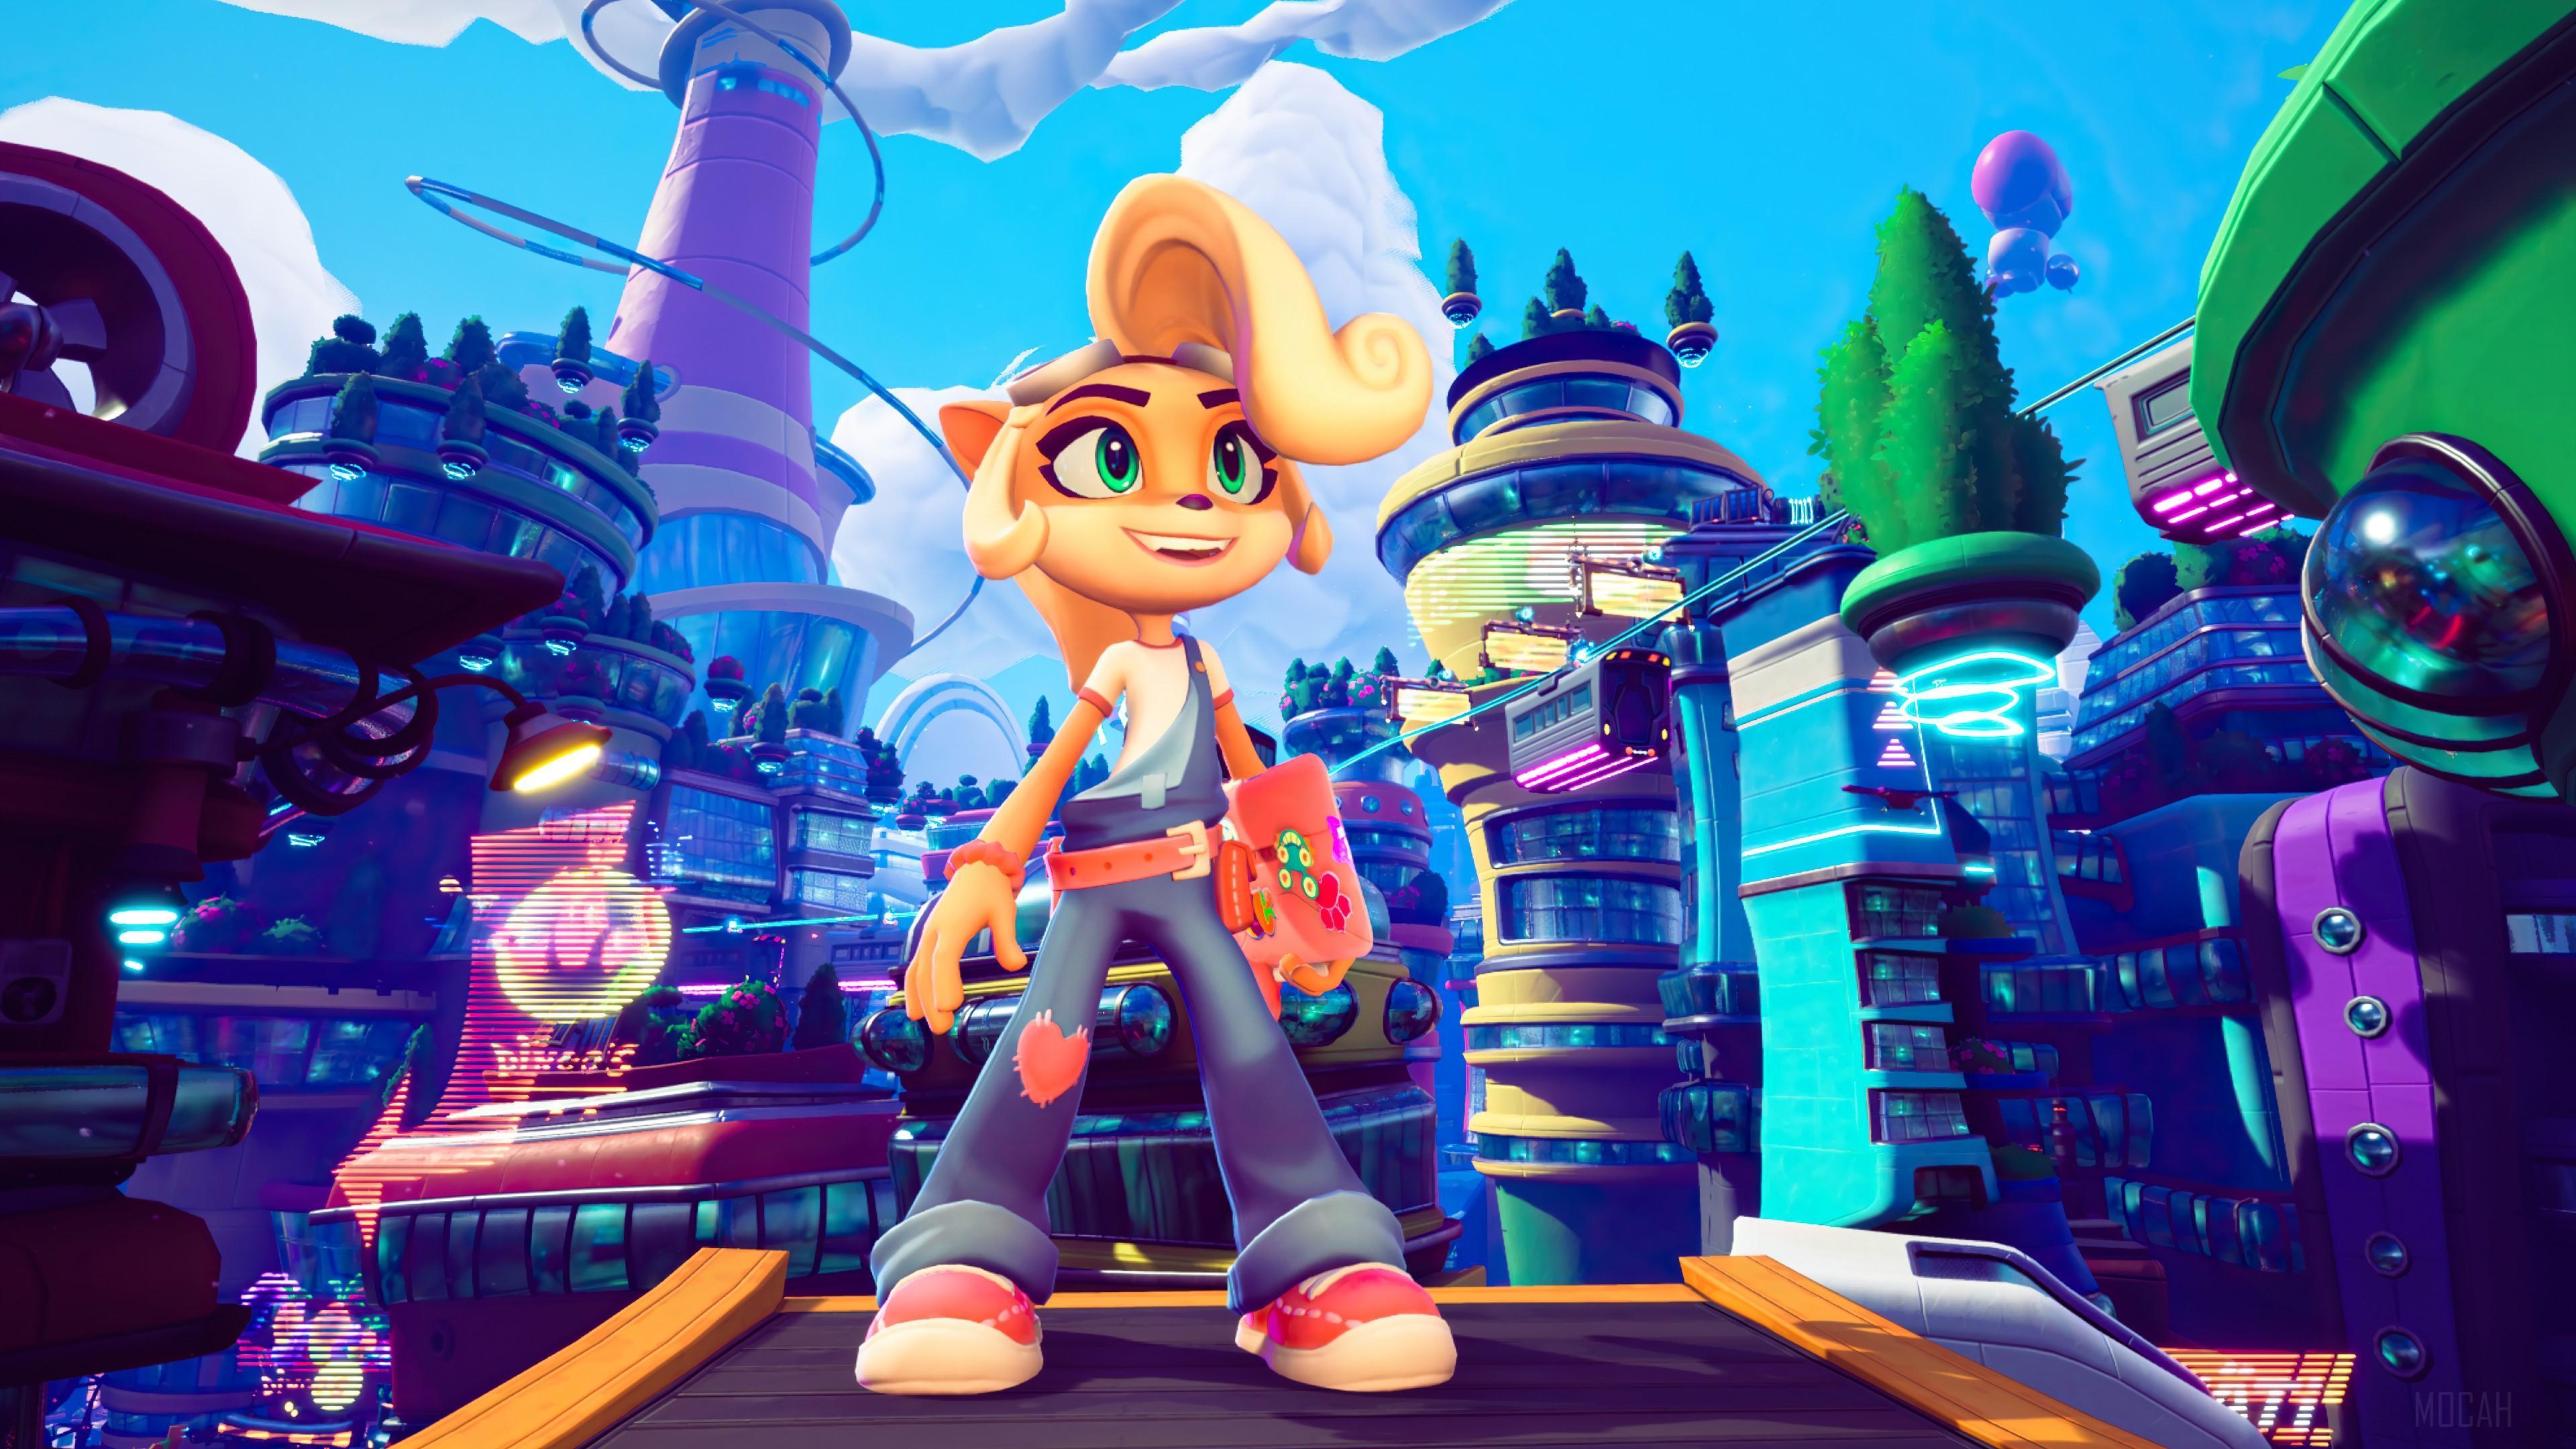 HD wallpaper, Video Game, Crash Bandicoot 4 Its About Time, Coco Bandicoot 4K